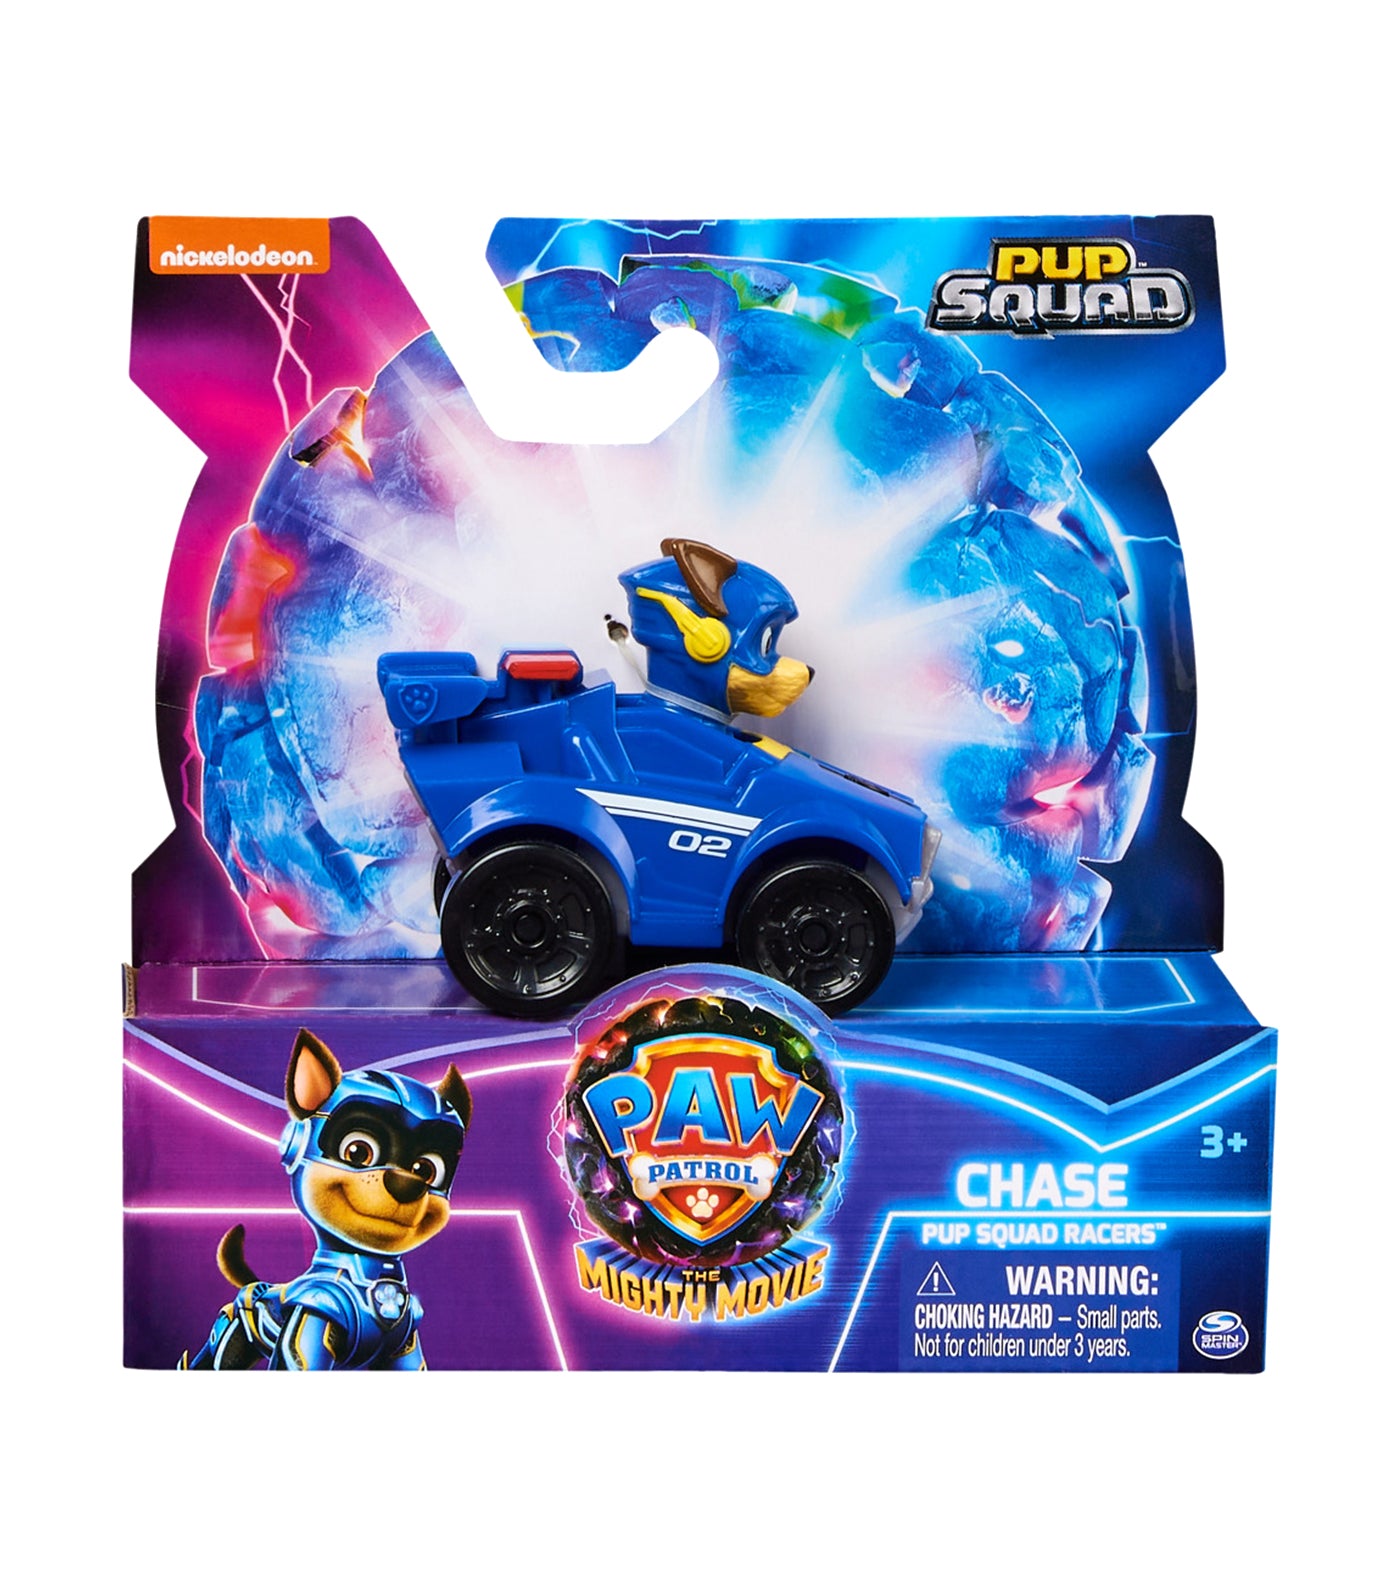 Chase Pup Squad Racers